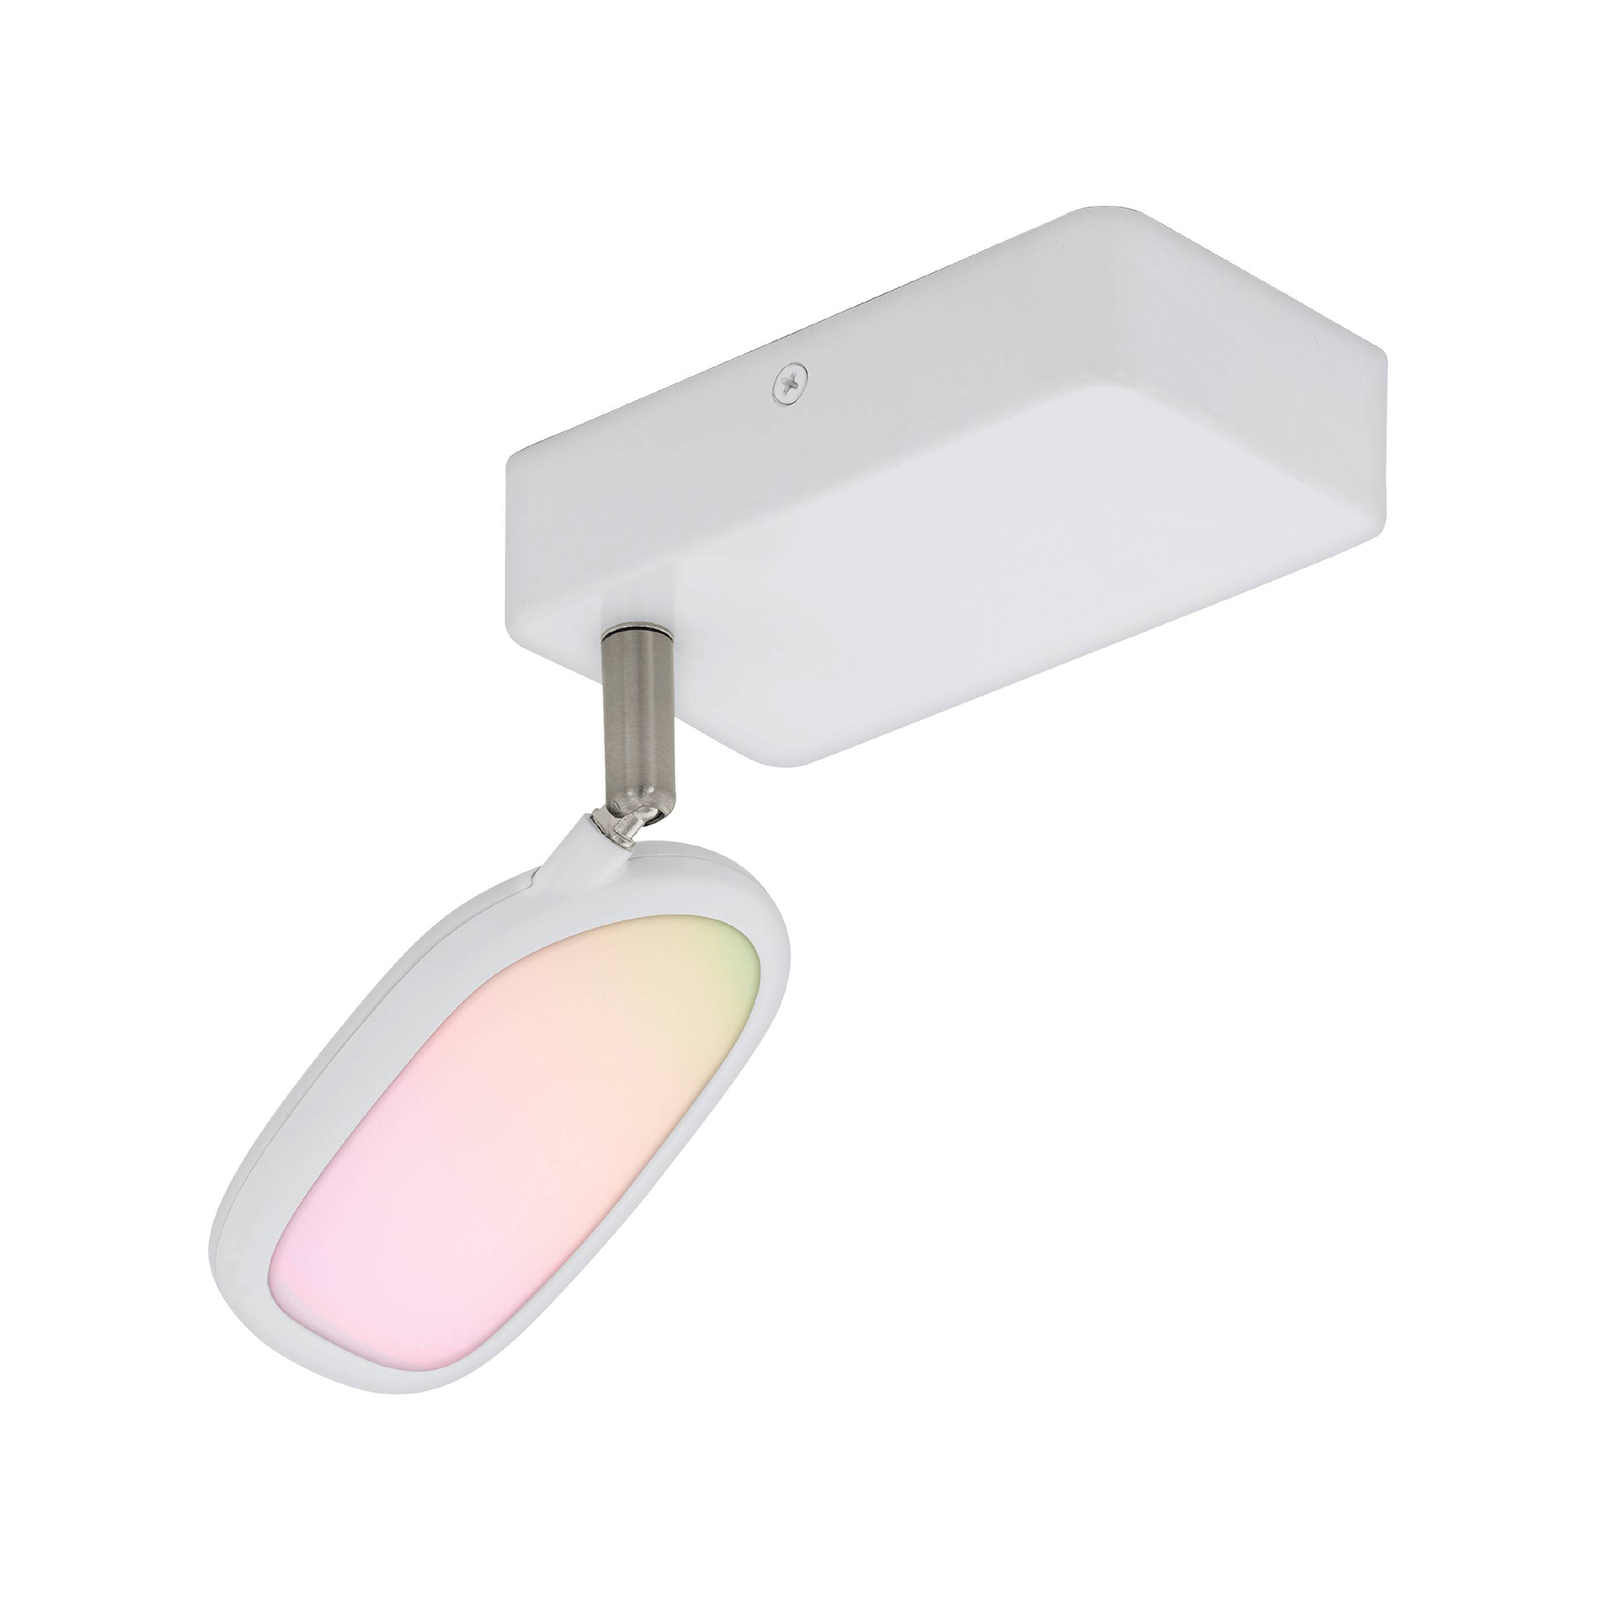 EGLO connect Palombare-C spot sufitowy LED 1-pkt.